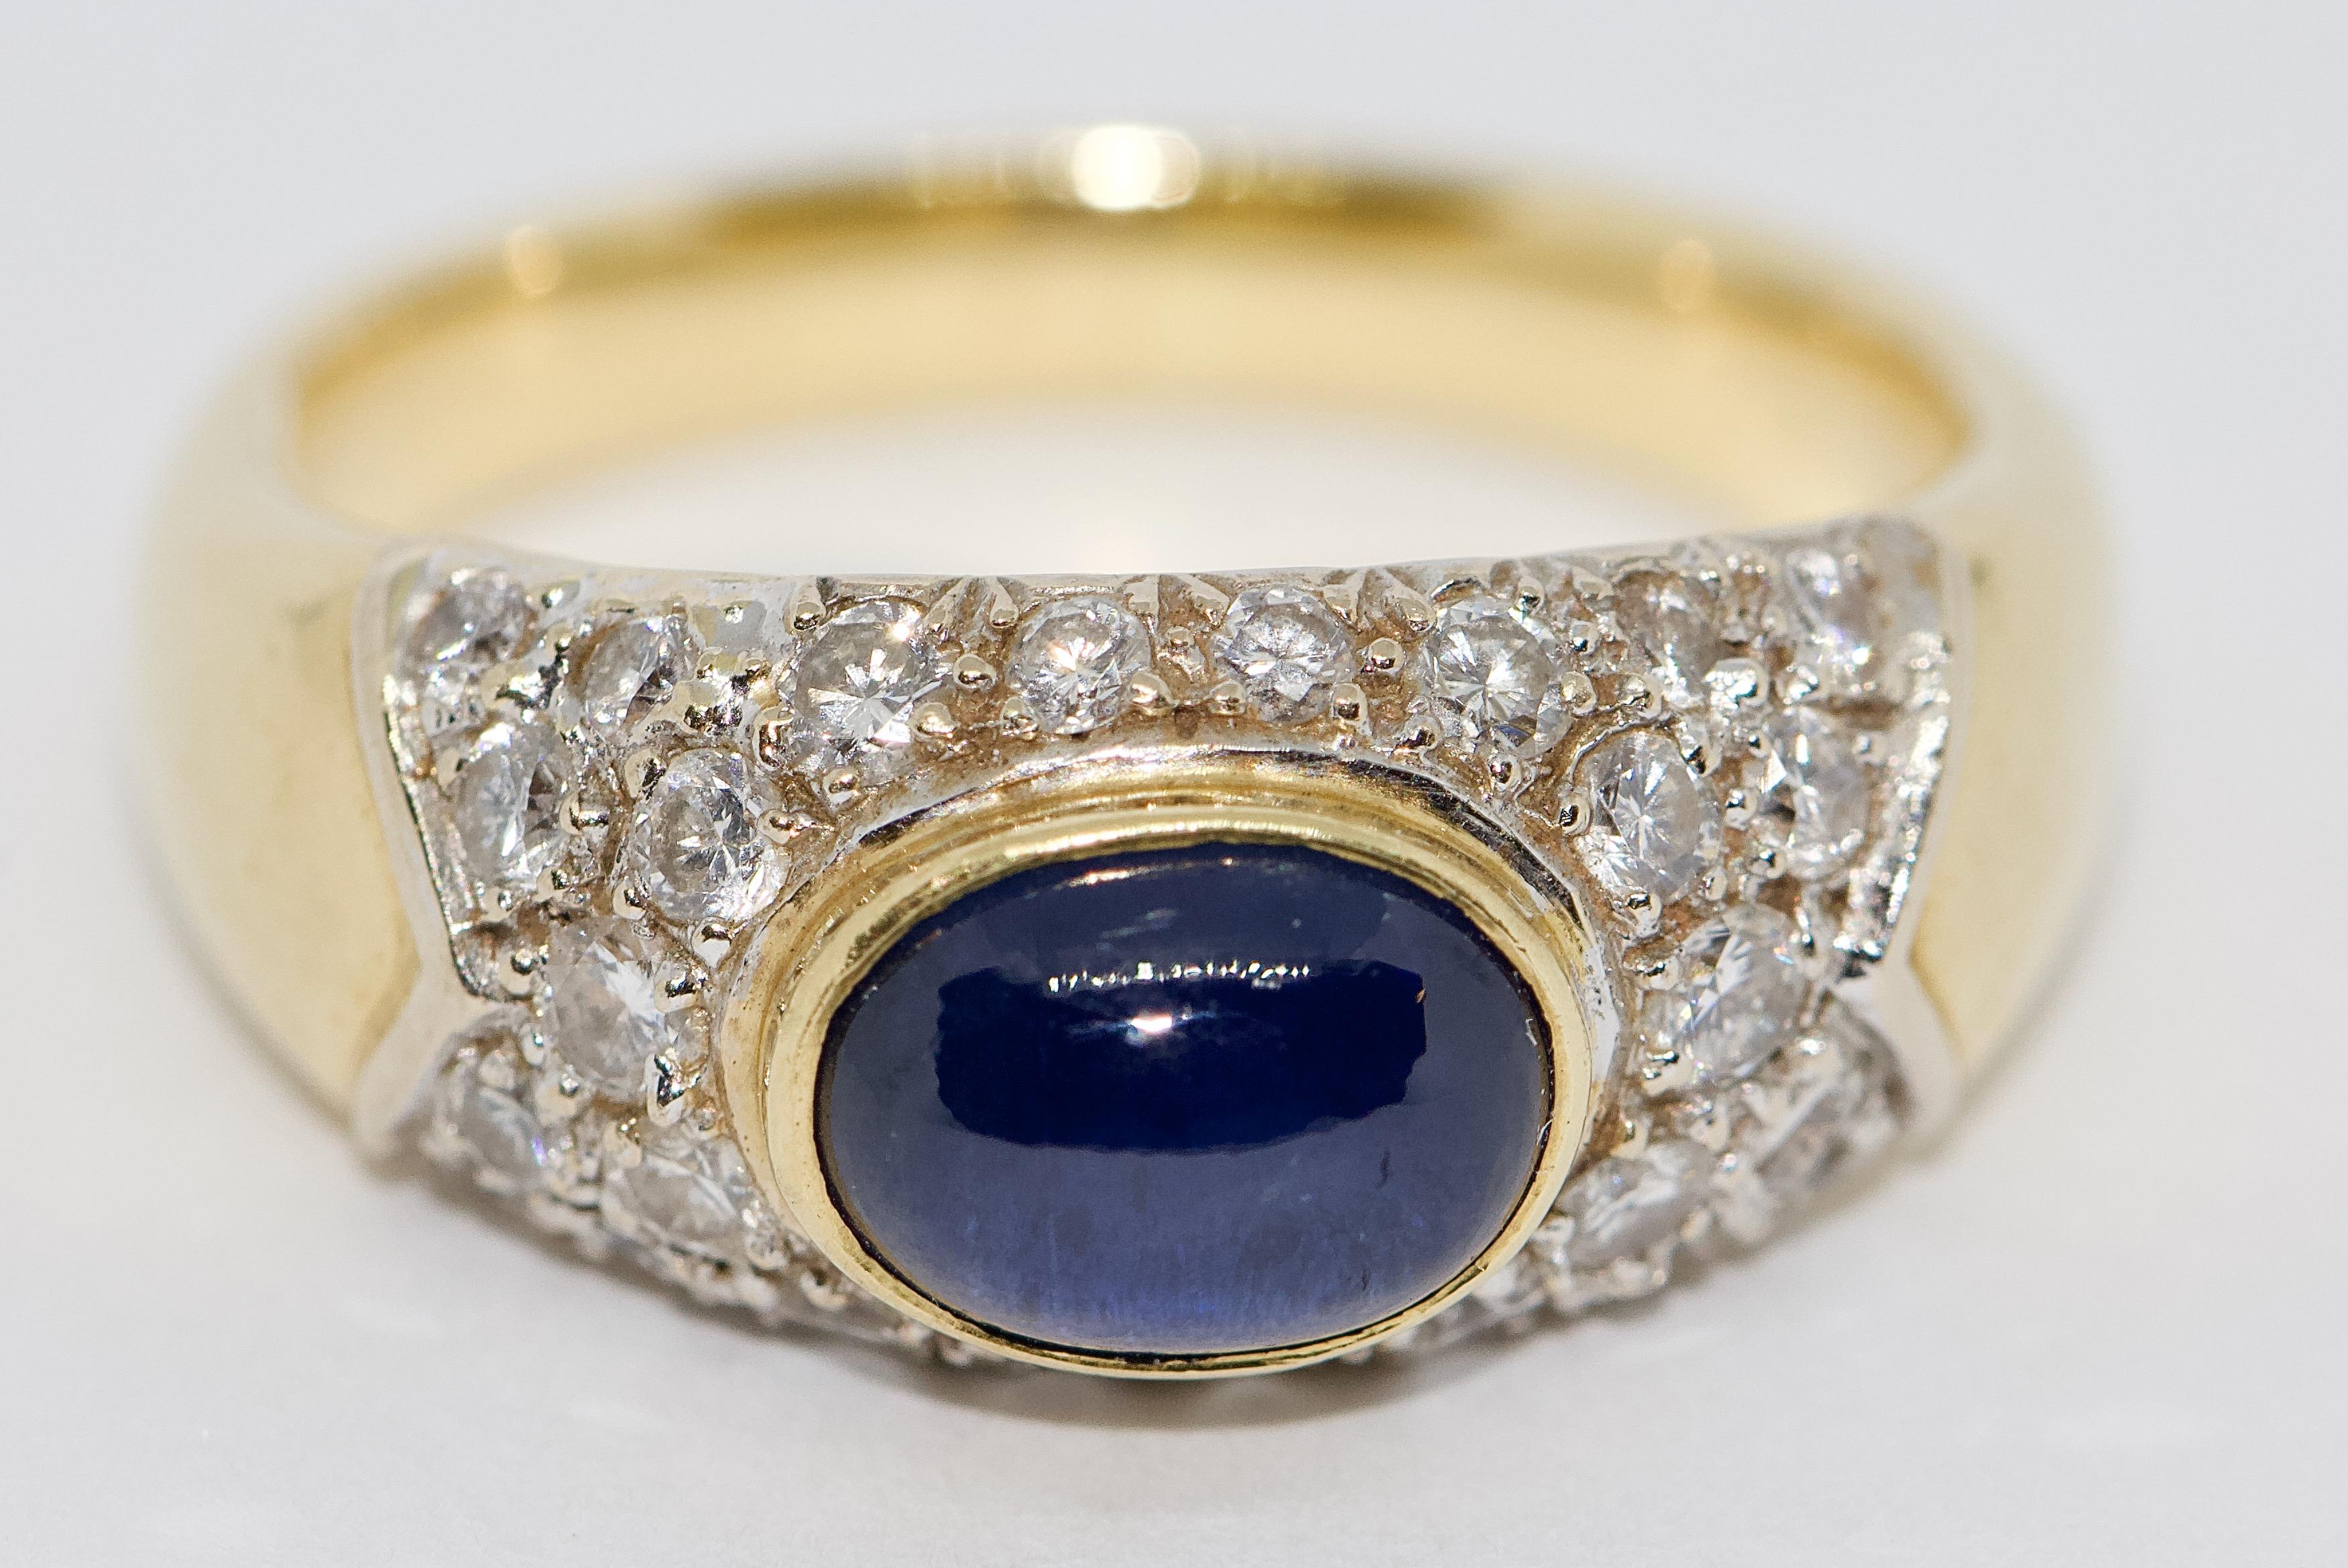 Fine ladies ring, 18 Karat gold with 1.64 ct. sapphire and diamonds.

Including certificate of authenticity.

US ring size 7 1/2.
On request we can adjust the ring size expertly.